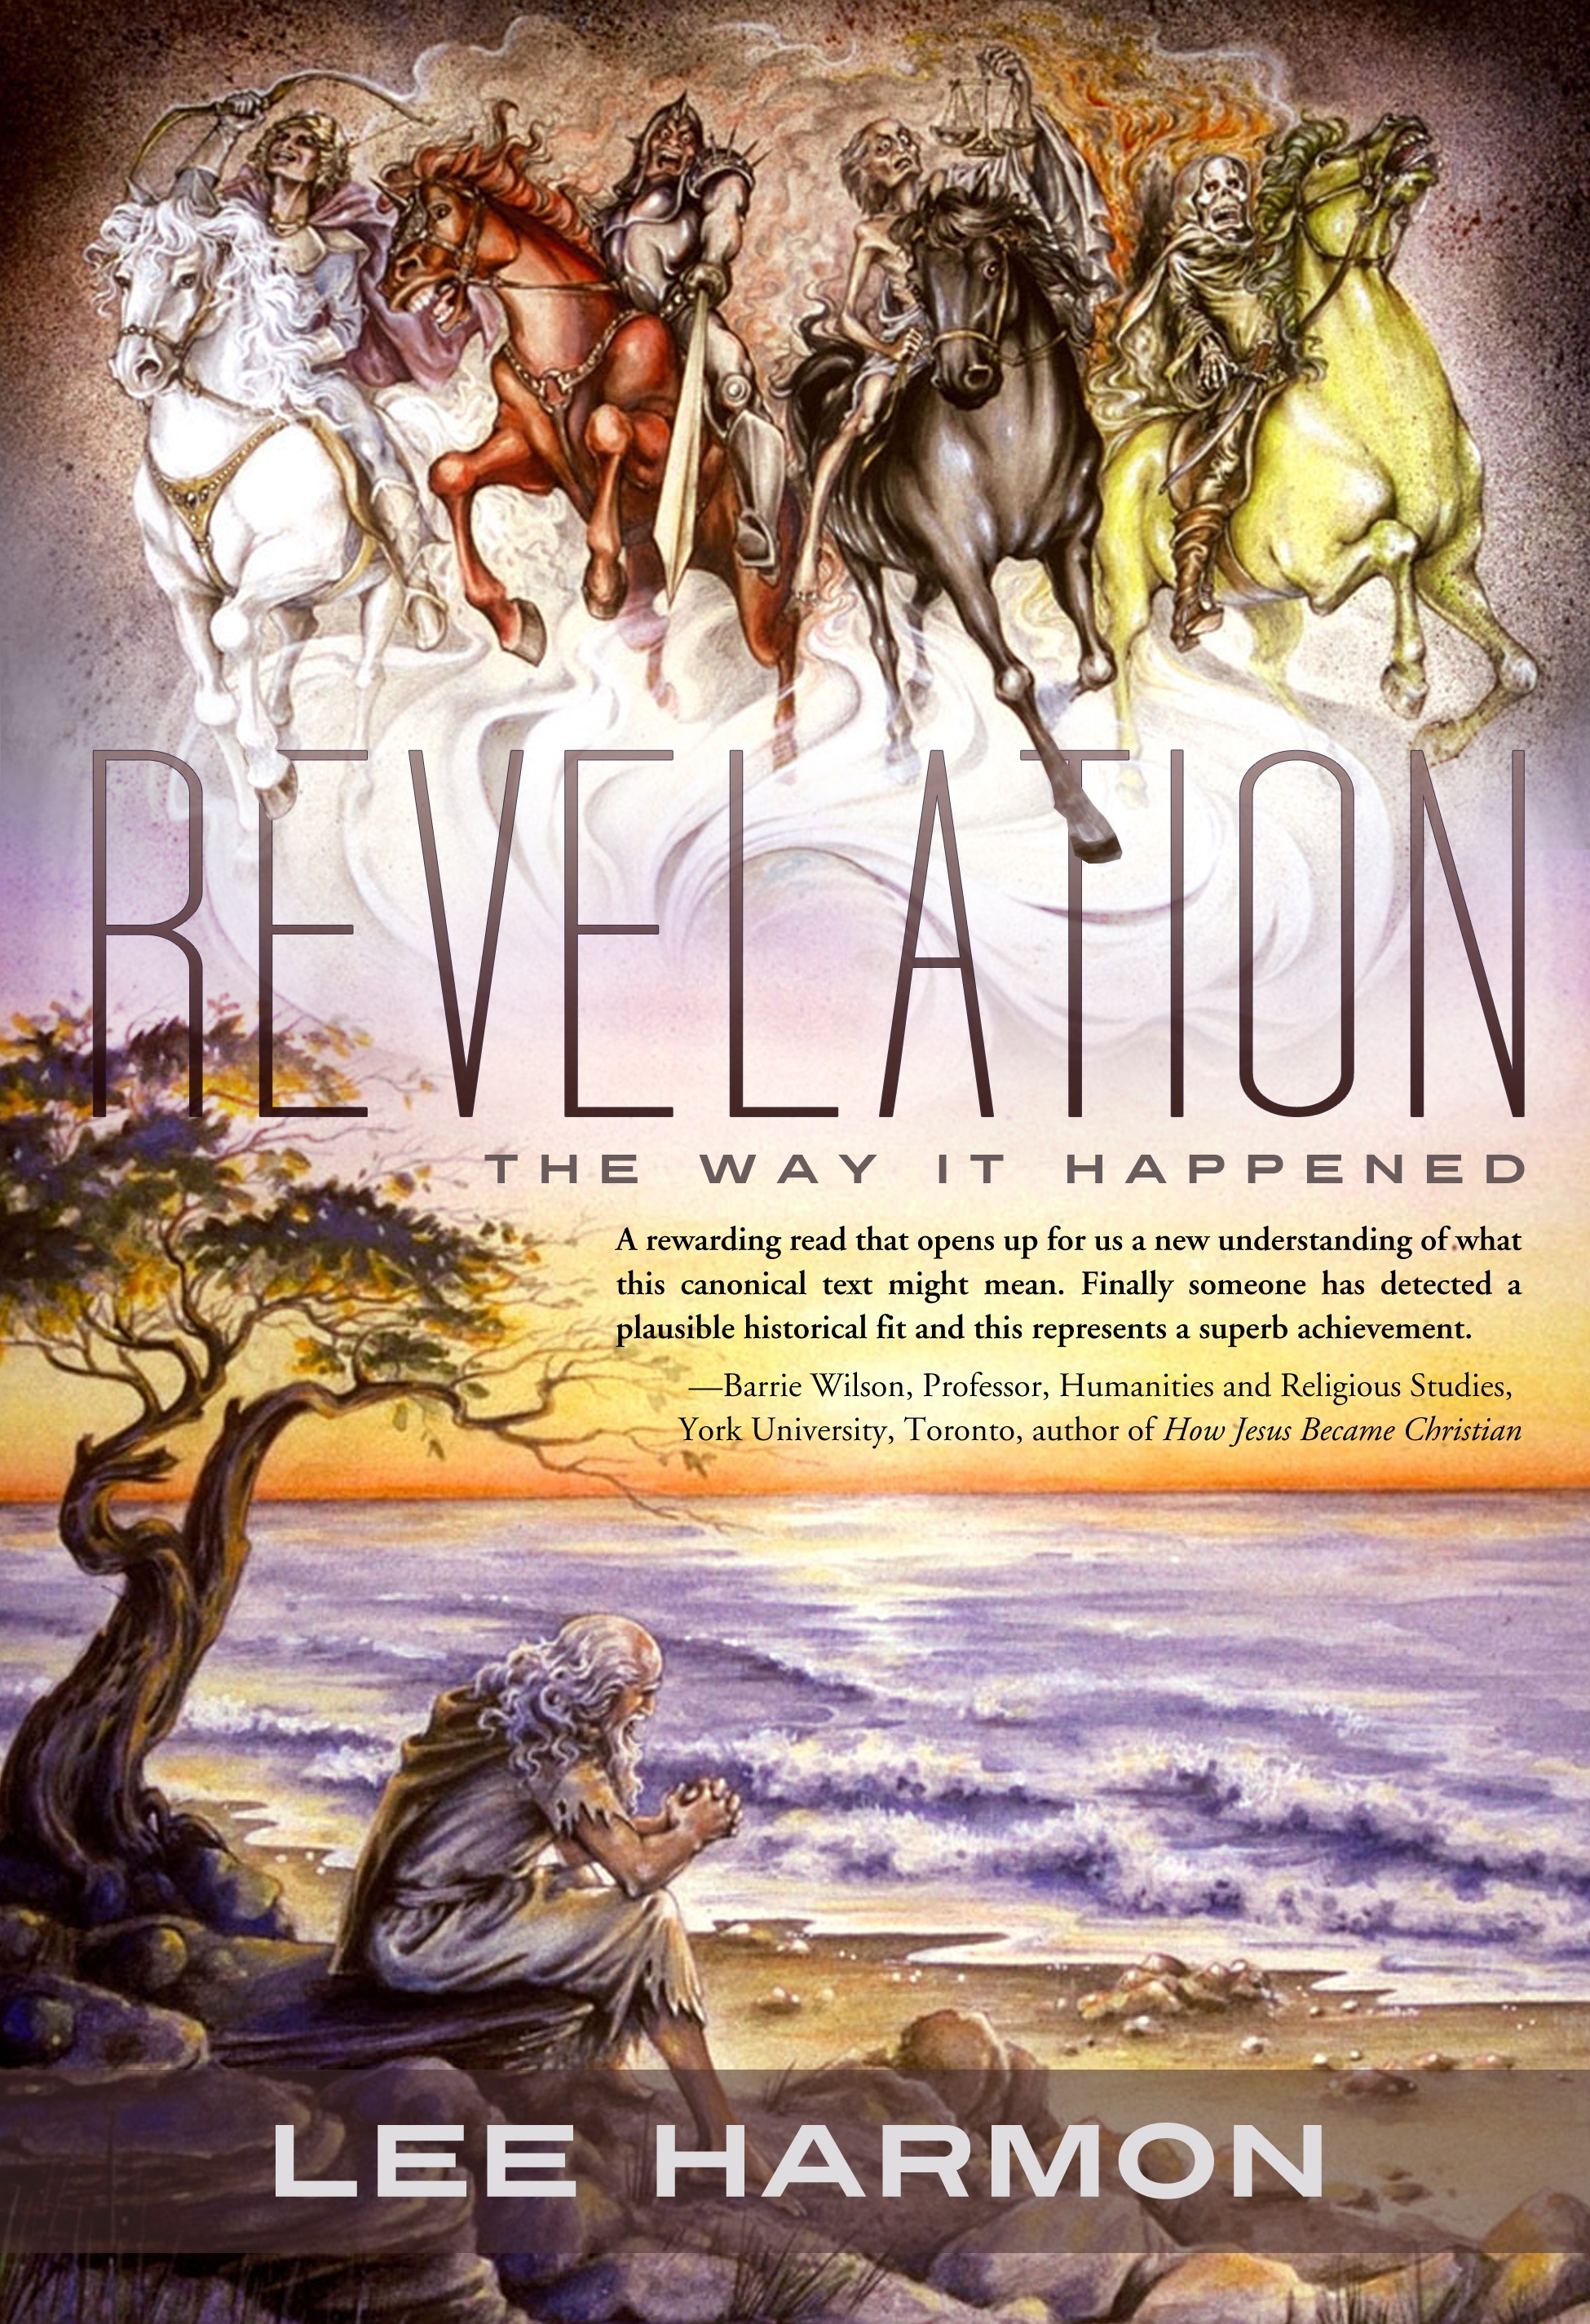 A review of the story of revelation